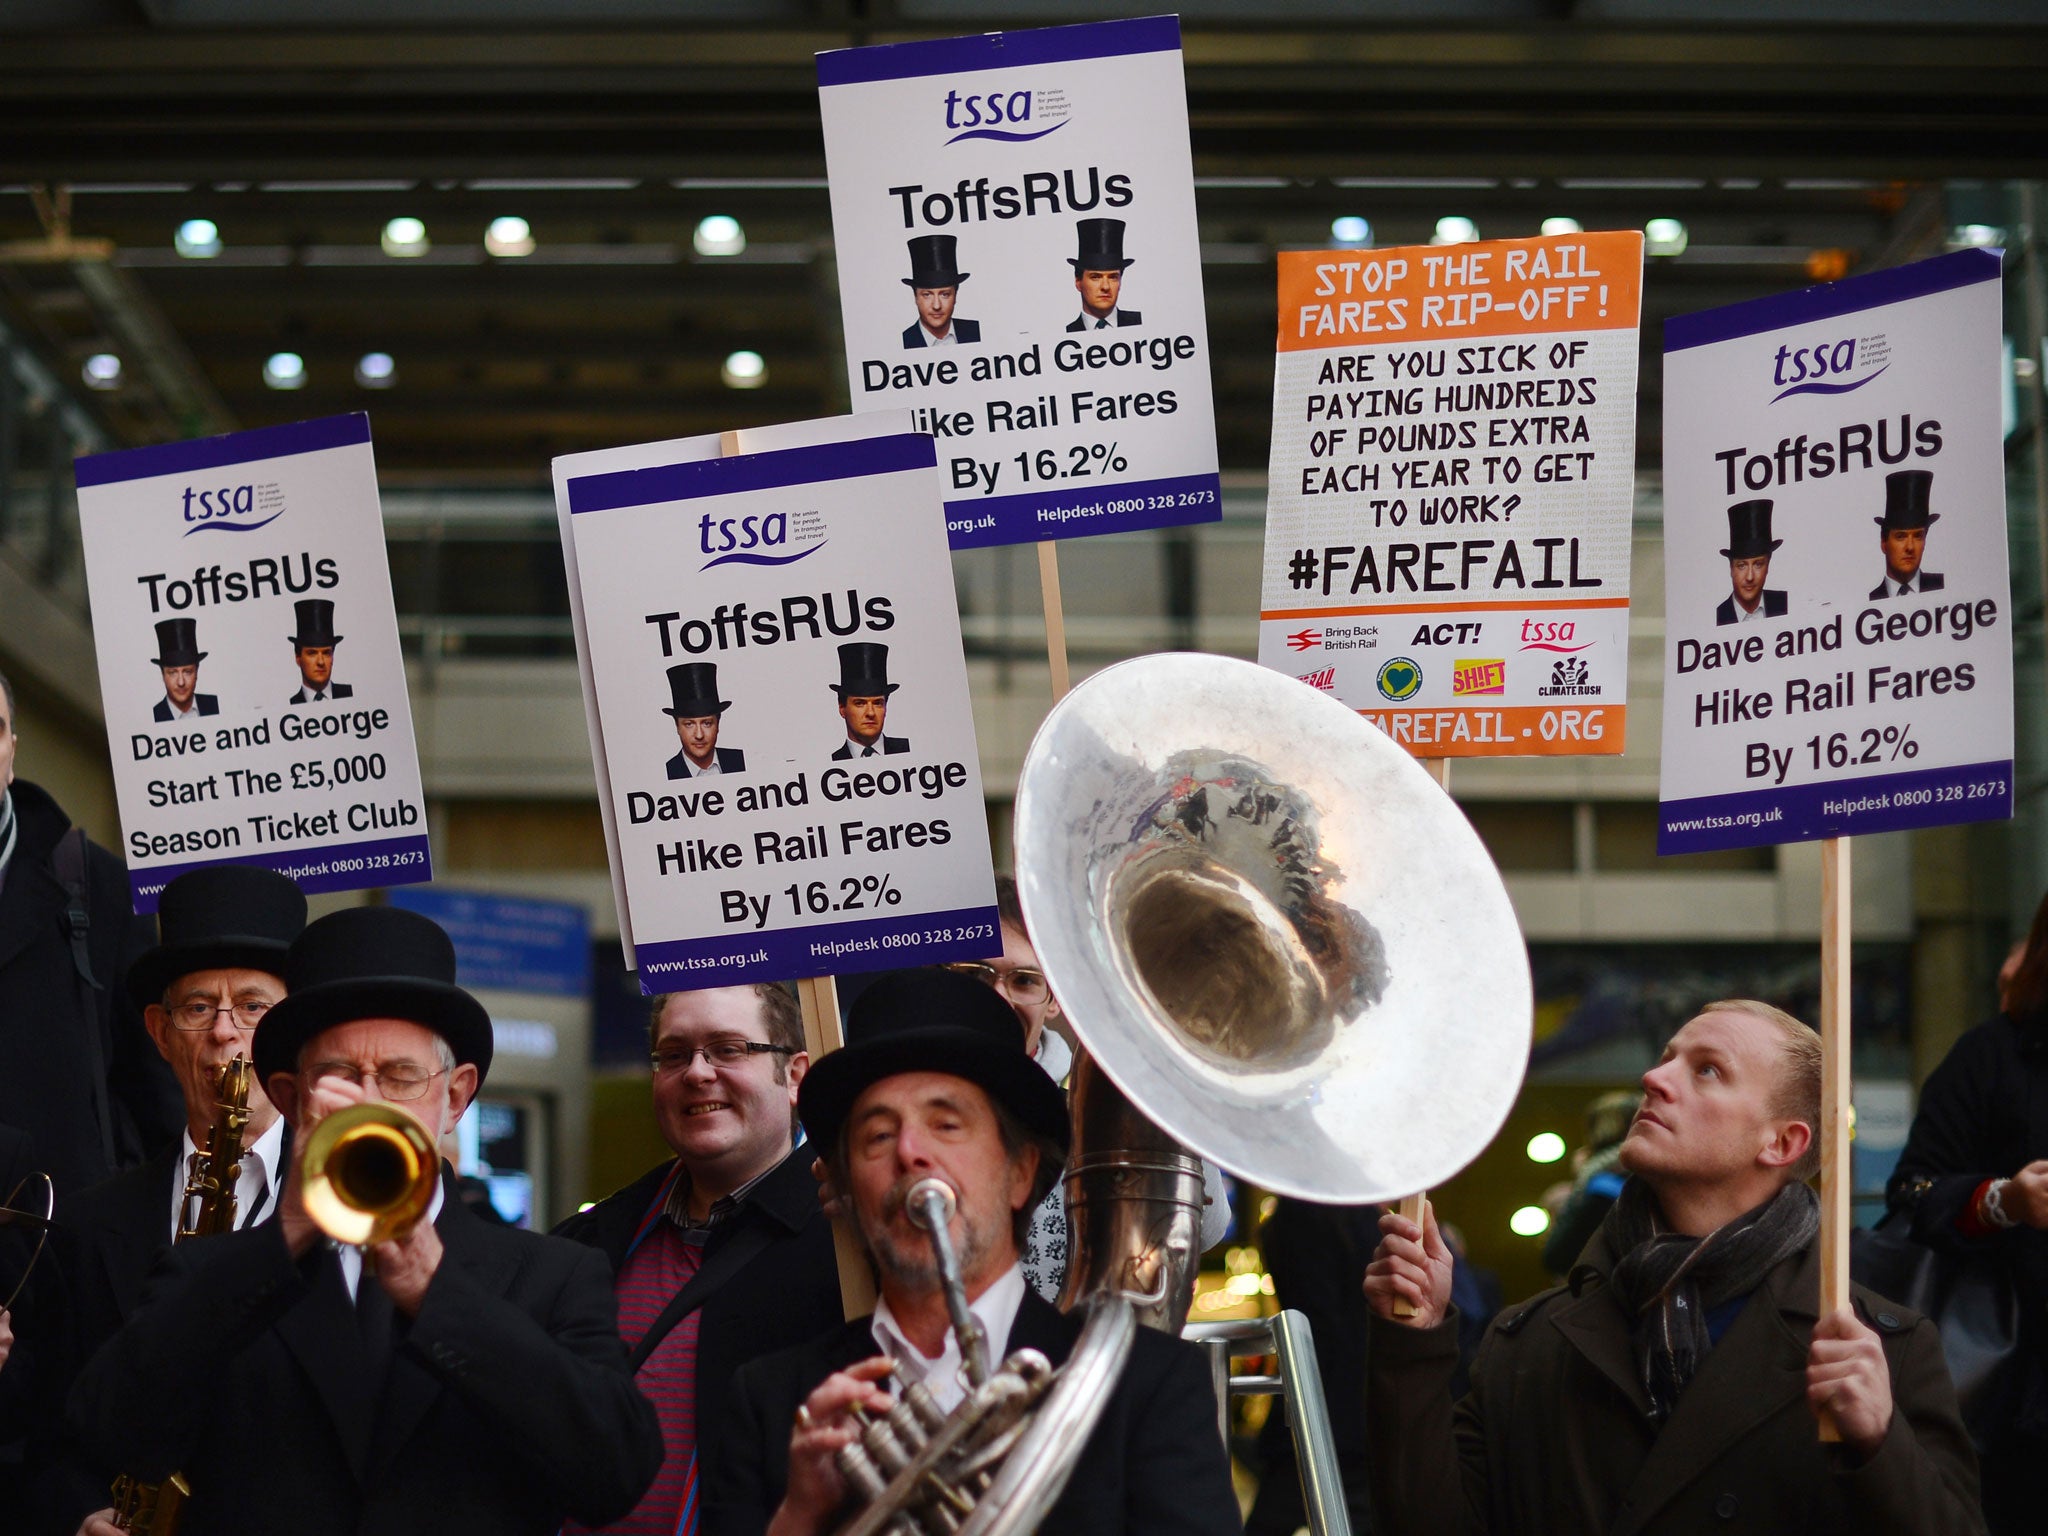 The 'ToffsRUs' jazz band play during a demonstration against a hike in rail fares at Kings Cross station in central London on January 2, 2013.